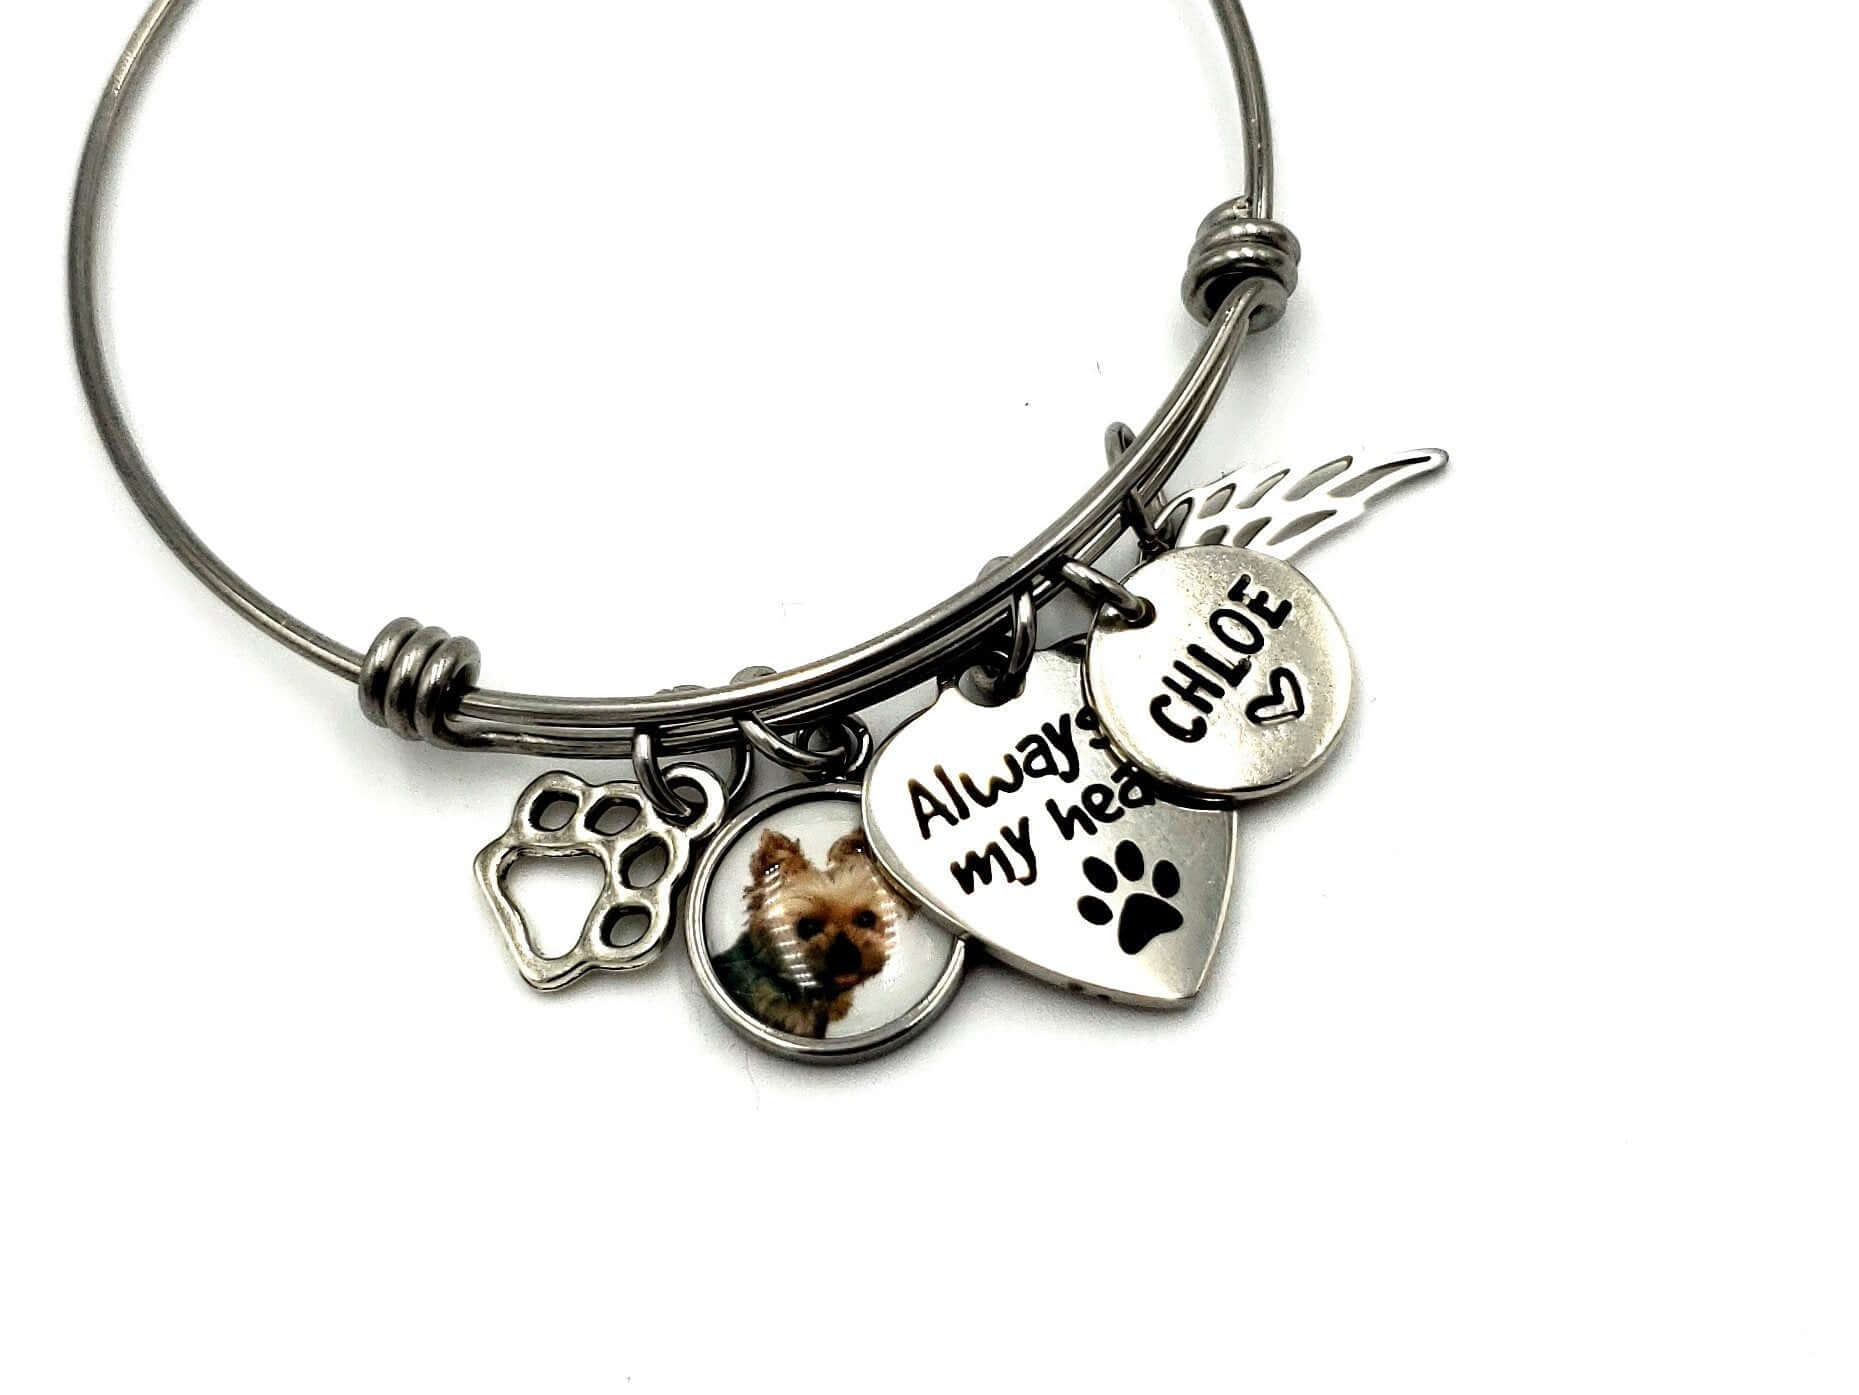 Dog Memorial Bracelet in Beautiful Gift Box - Pet Memorial Gifts - Dog Memorial Gifts - Dog Bereavement Gifts for Loss of Pet - Pet Loss Gifts 